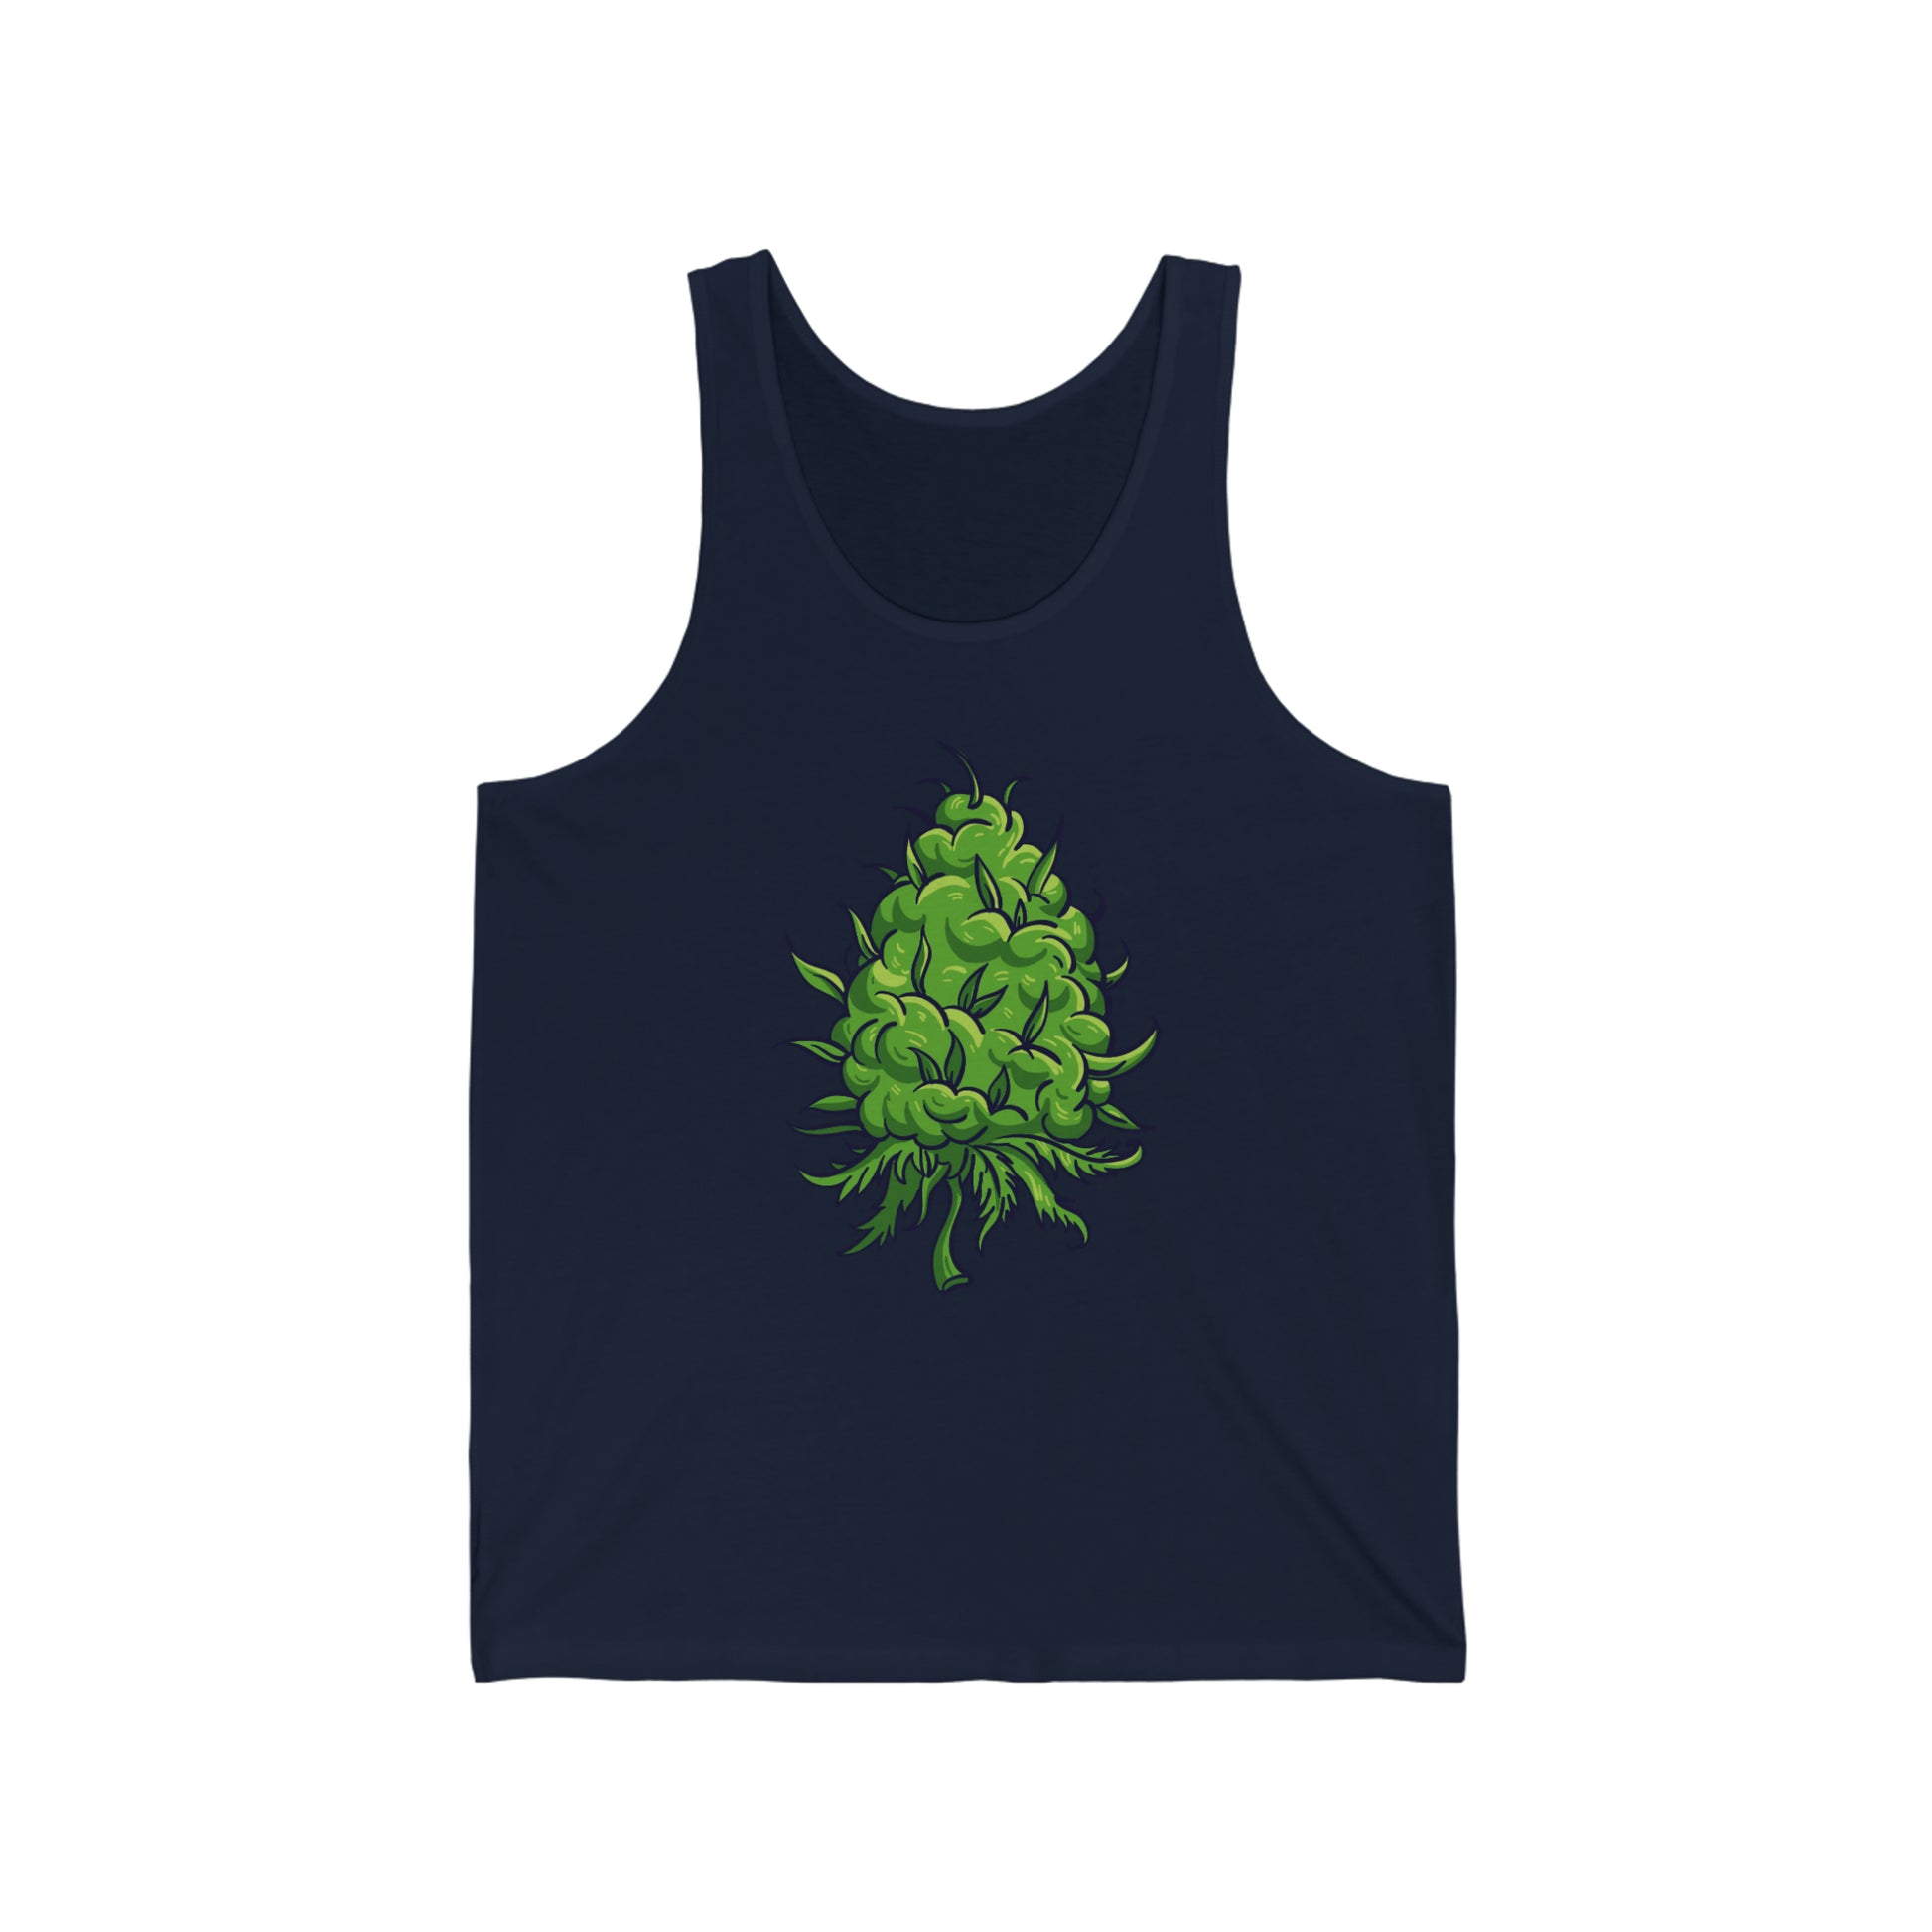 a navy blue Big Marijuana nug Jersey Tank top with a green weed plant on it.